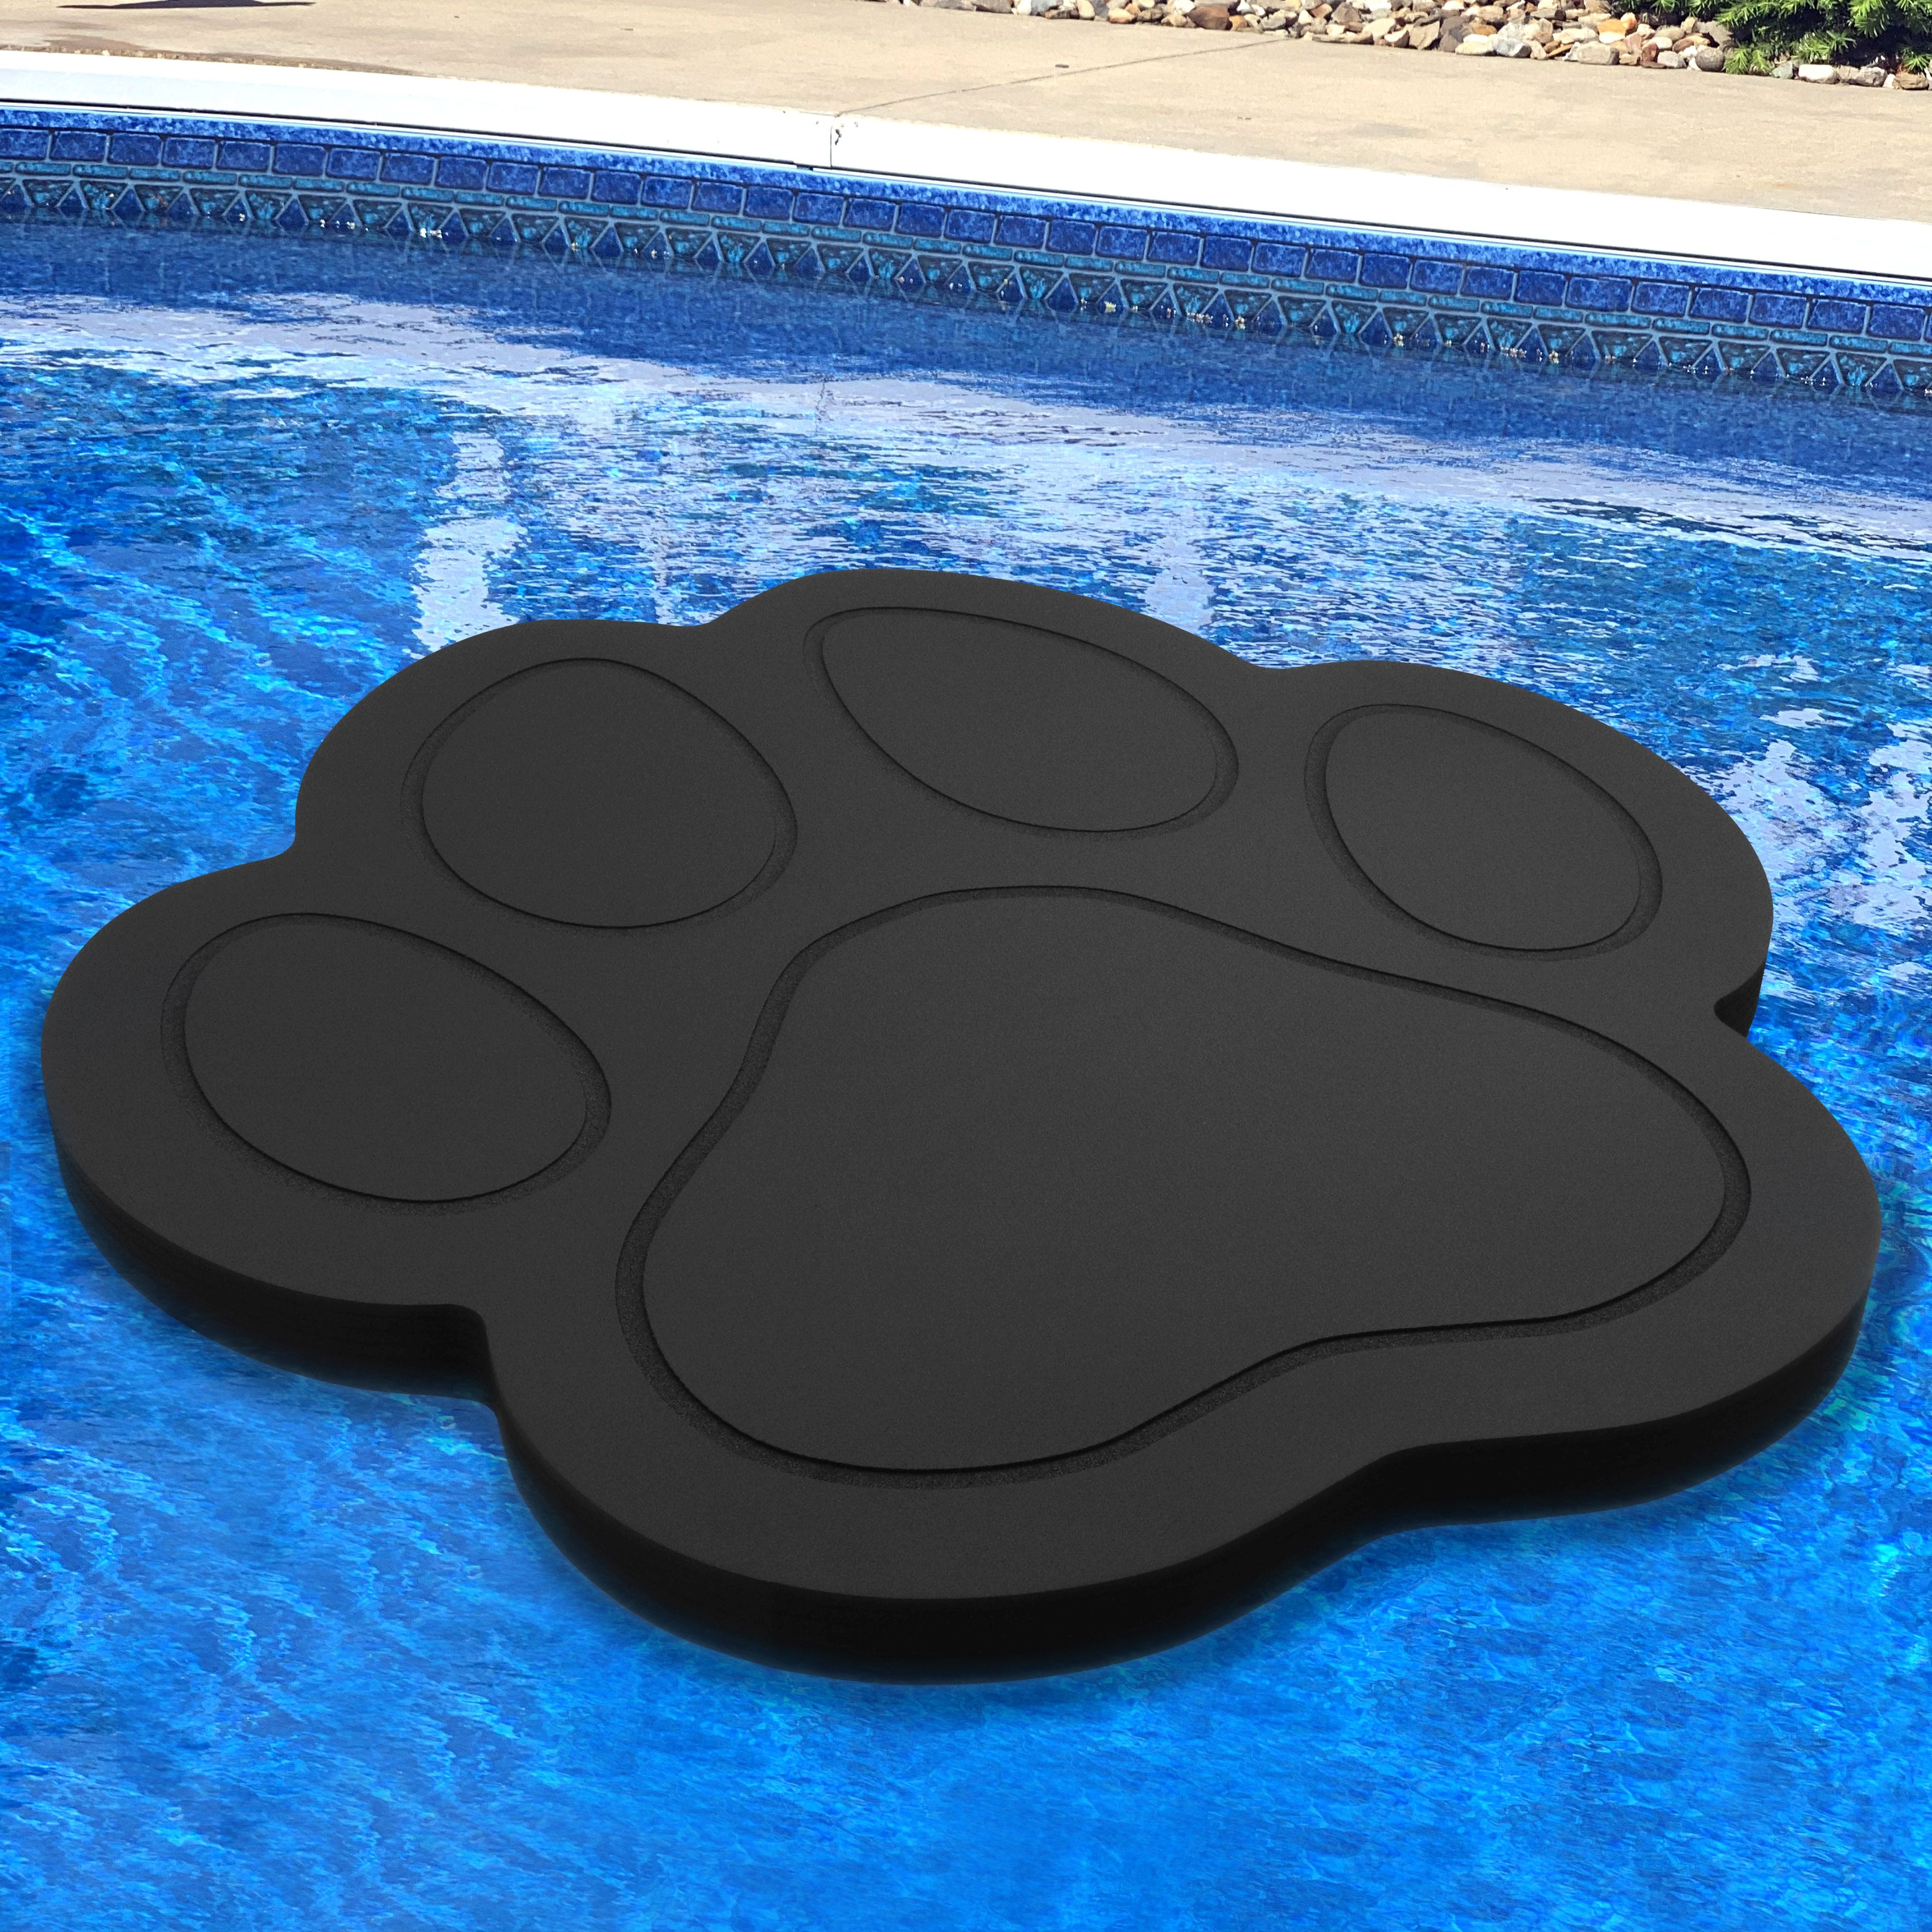 Floating Paw Print Lounging Pool Float 40"